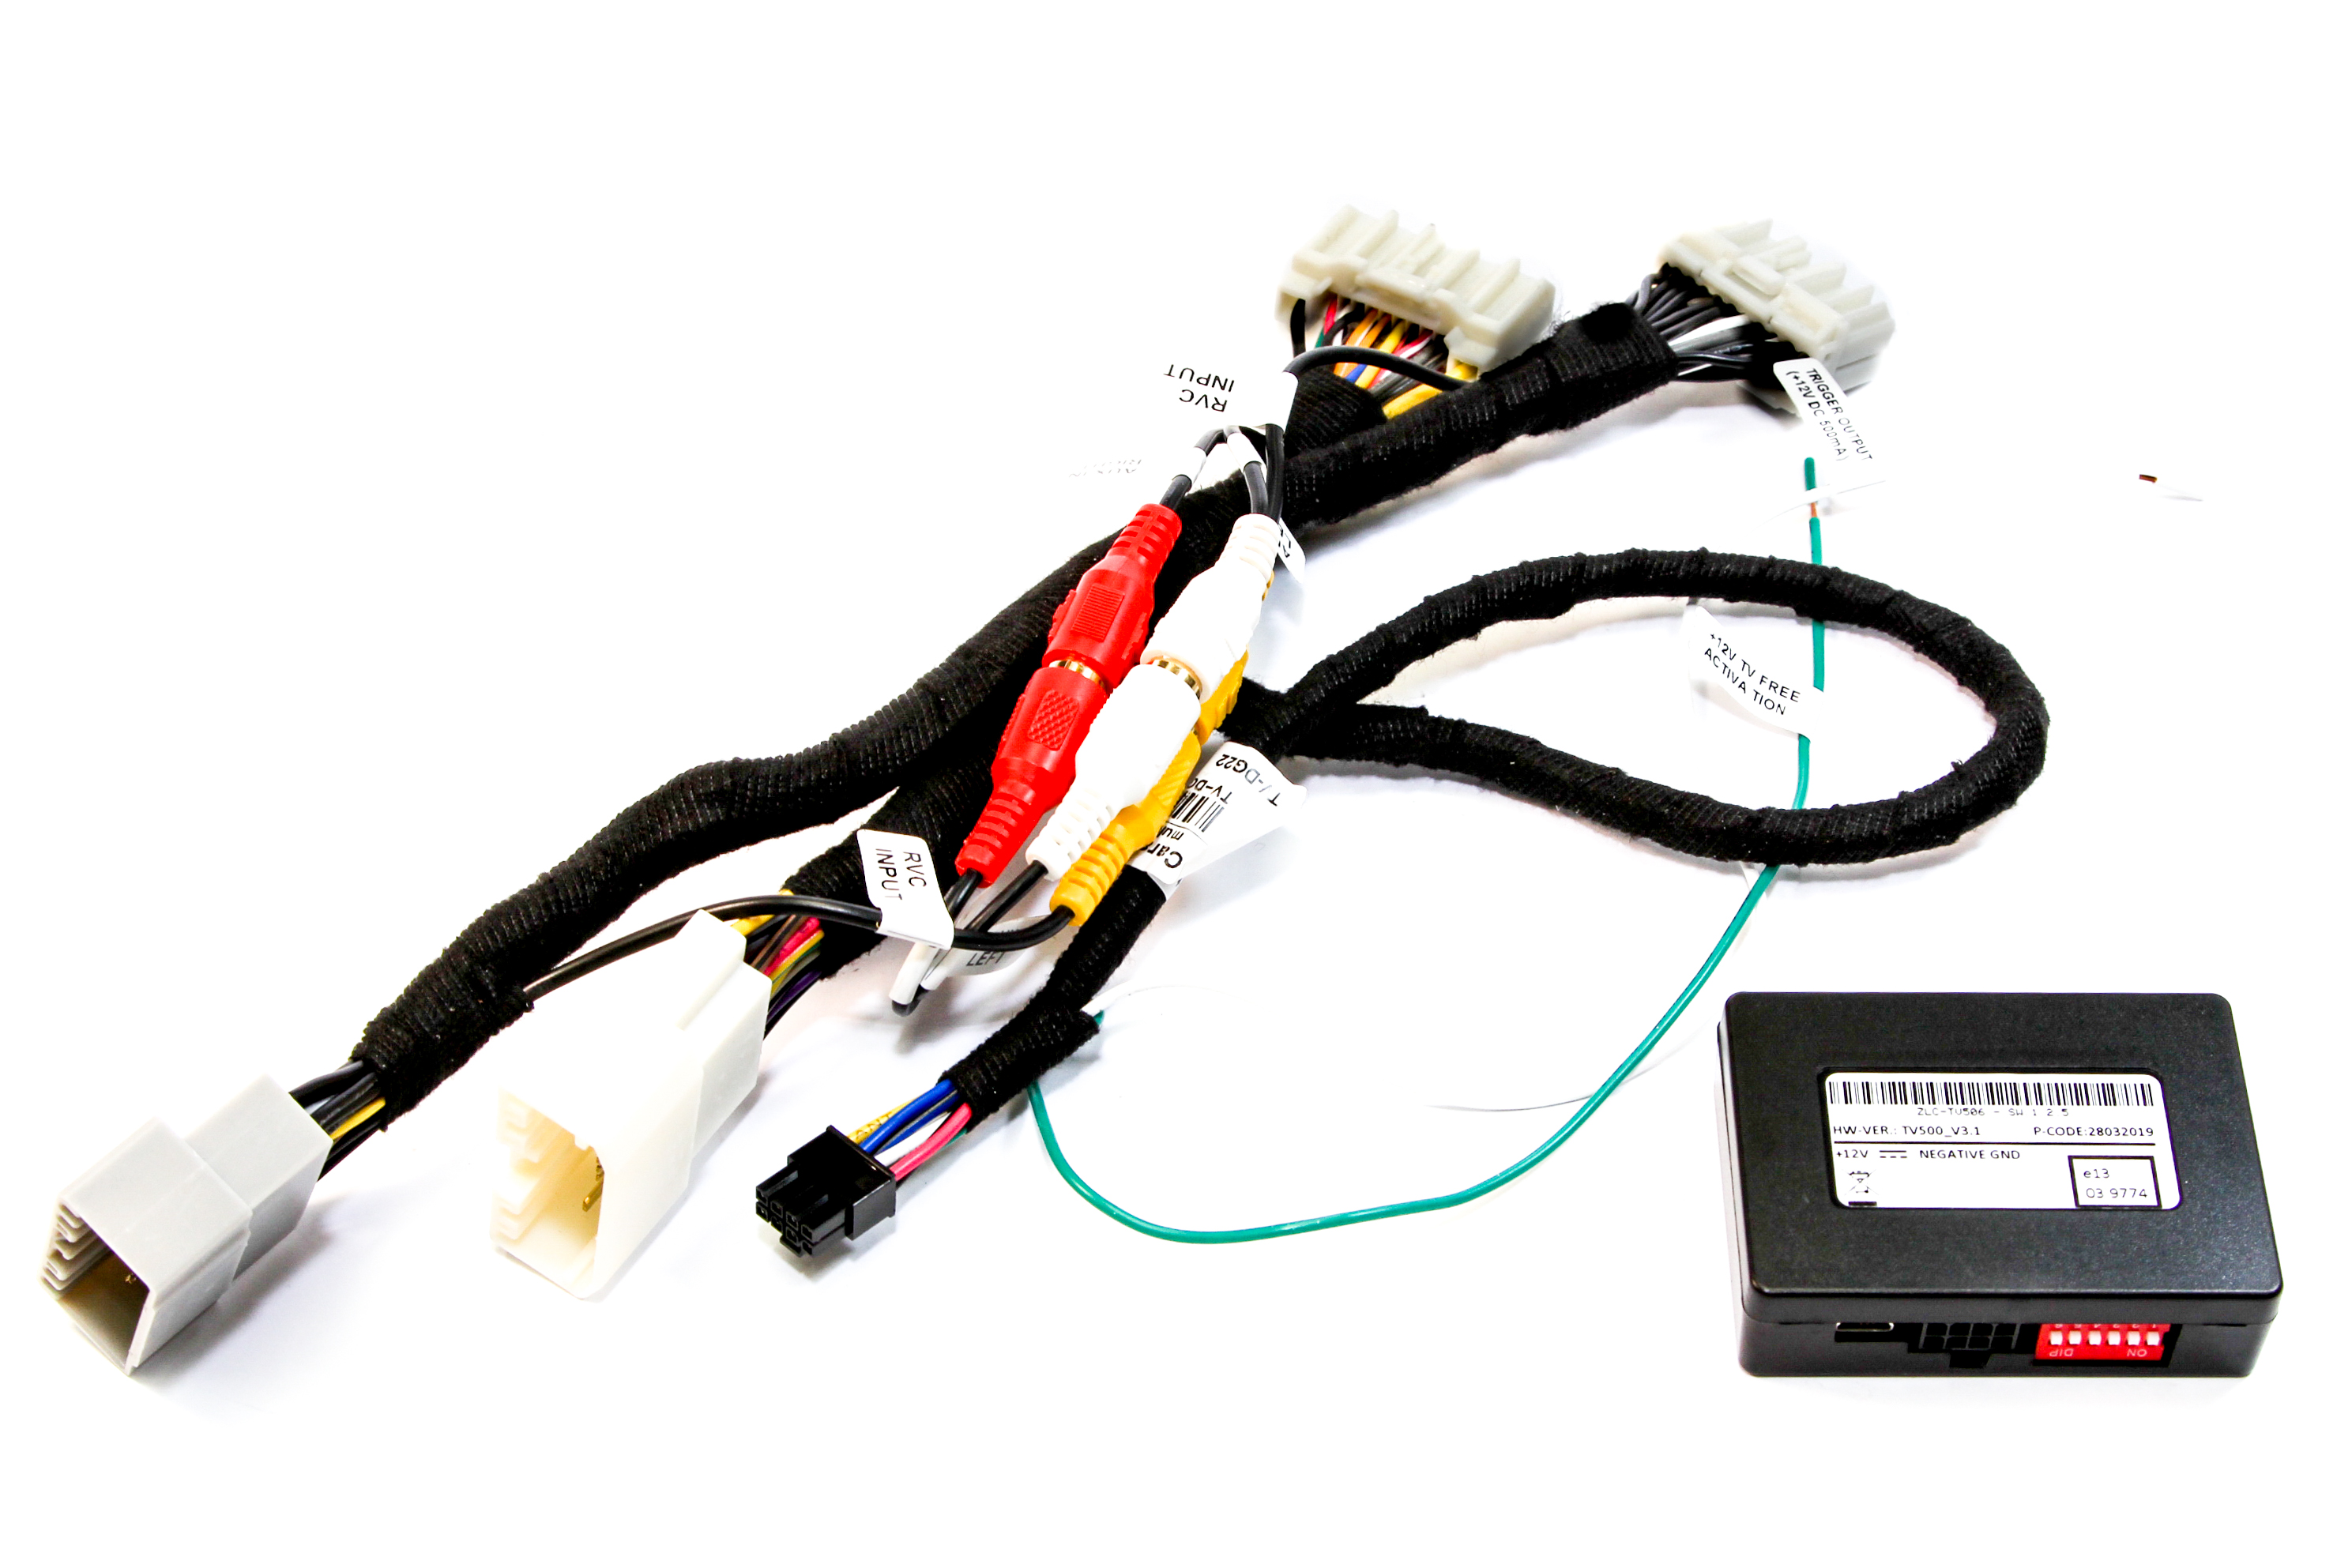 Rear view camera input interface for Chrysler, Dodge, Fiat, Lancia with Uconnect head units